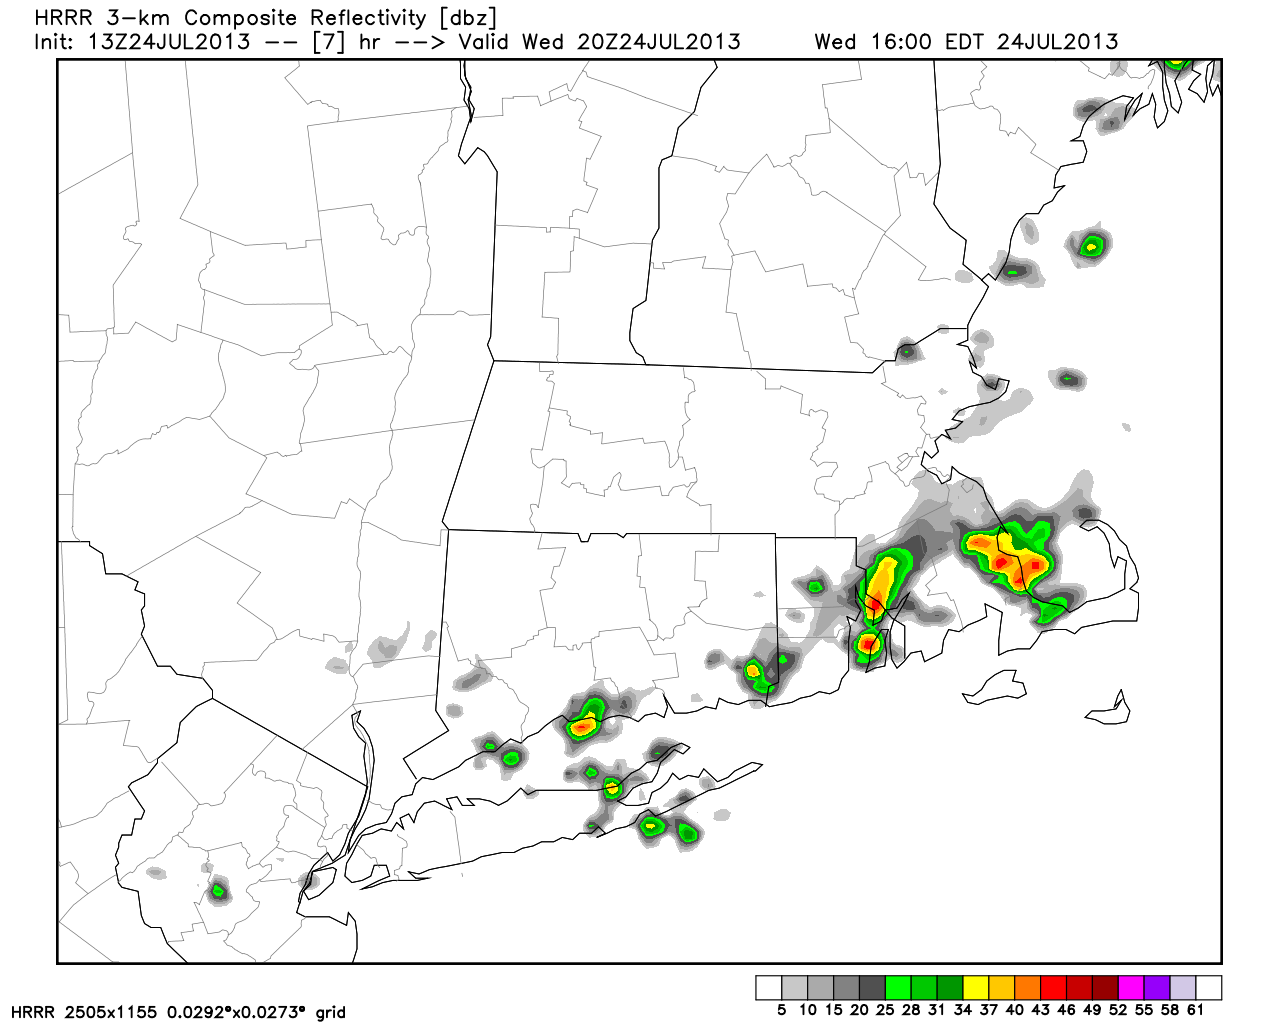 Short range models show a few t-storms popping up as a cold front passes Wednesday afternoon